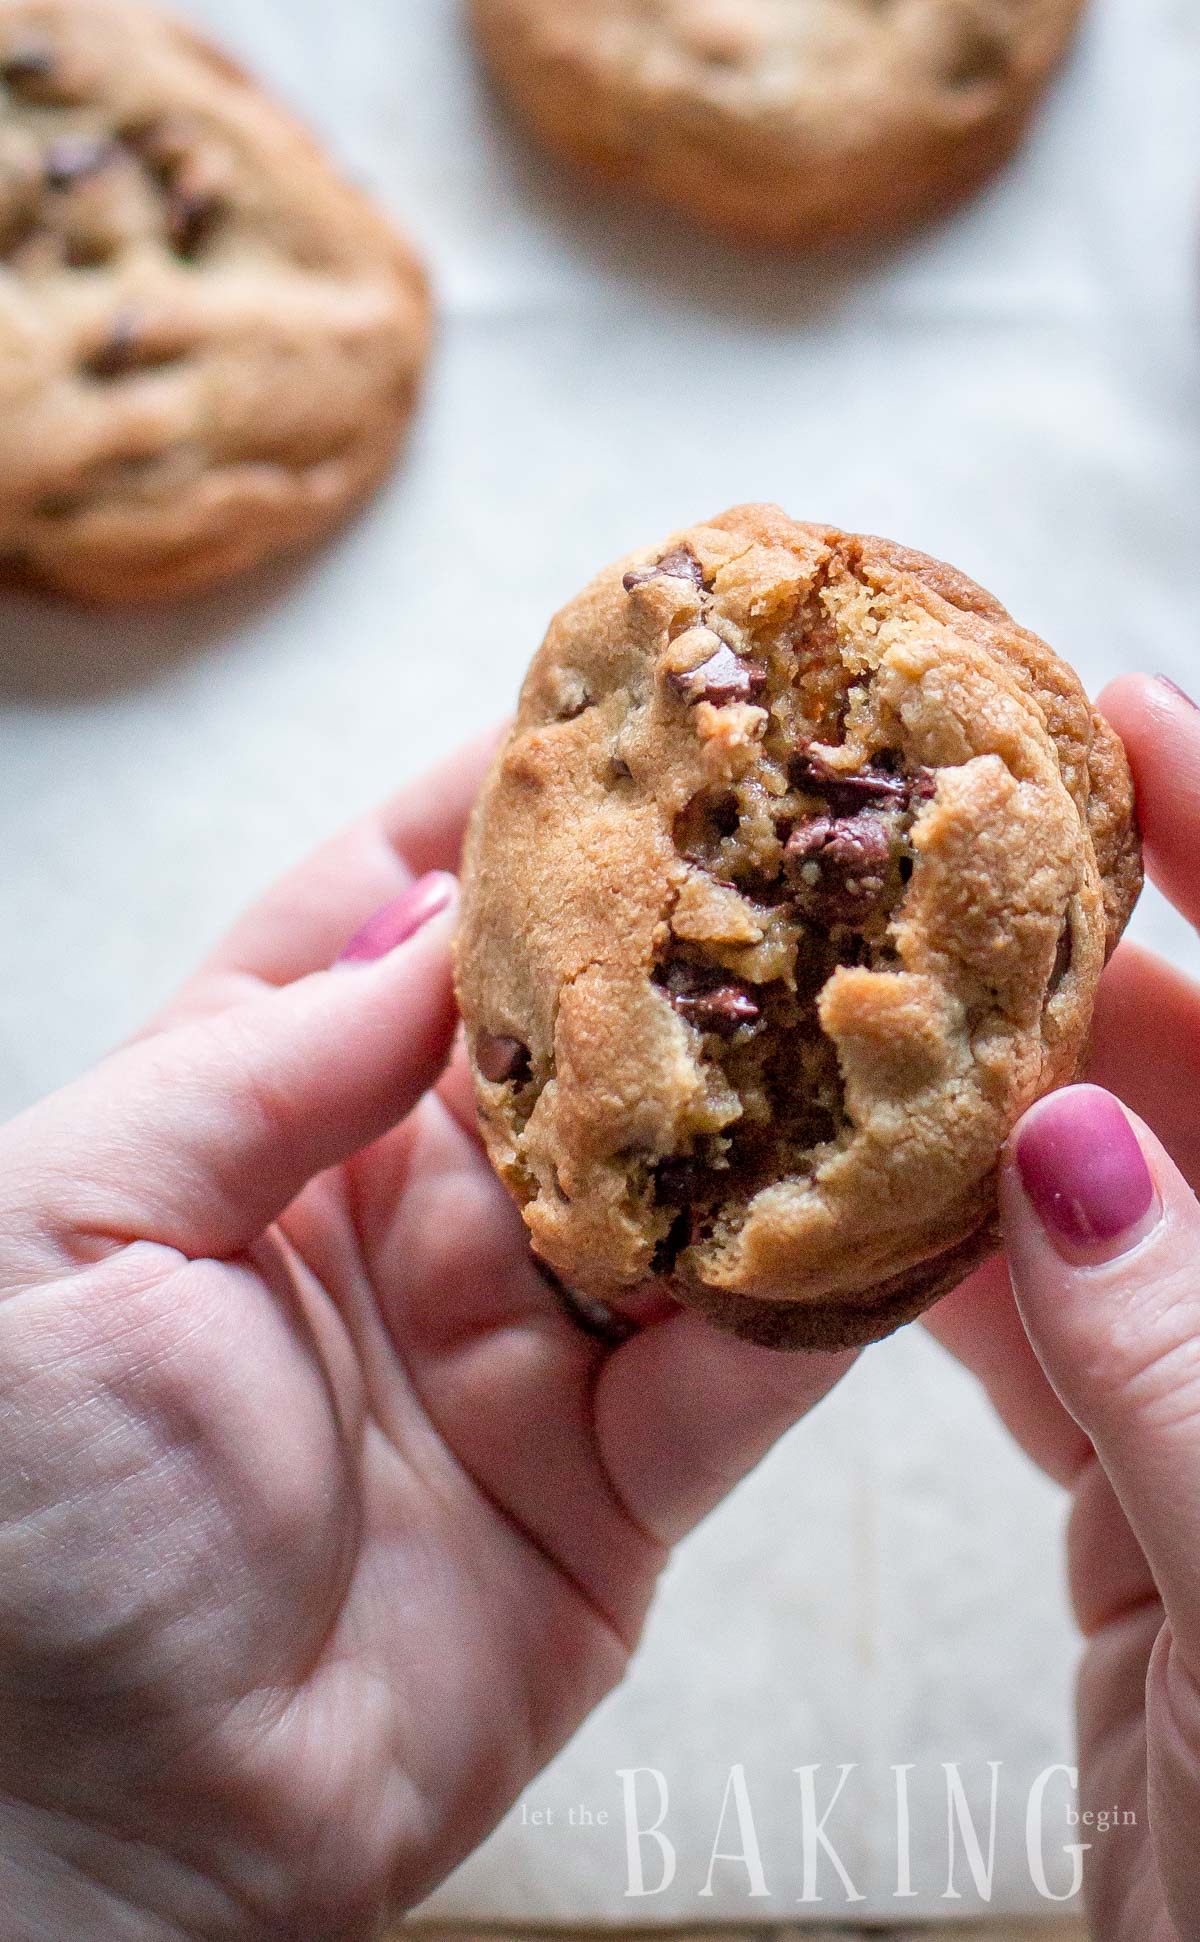 A soft chocolate chip cookie being ripped in half with chocolate chip morsels.